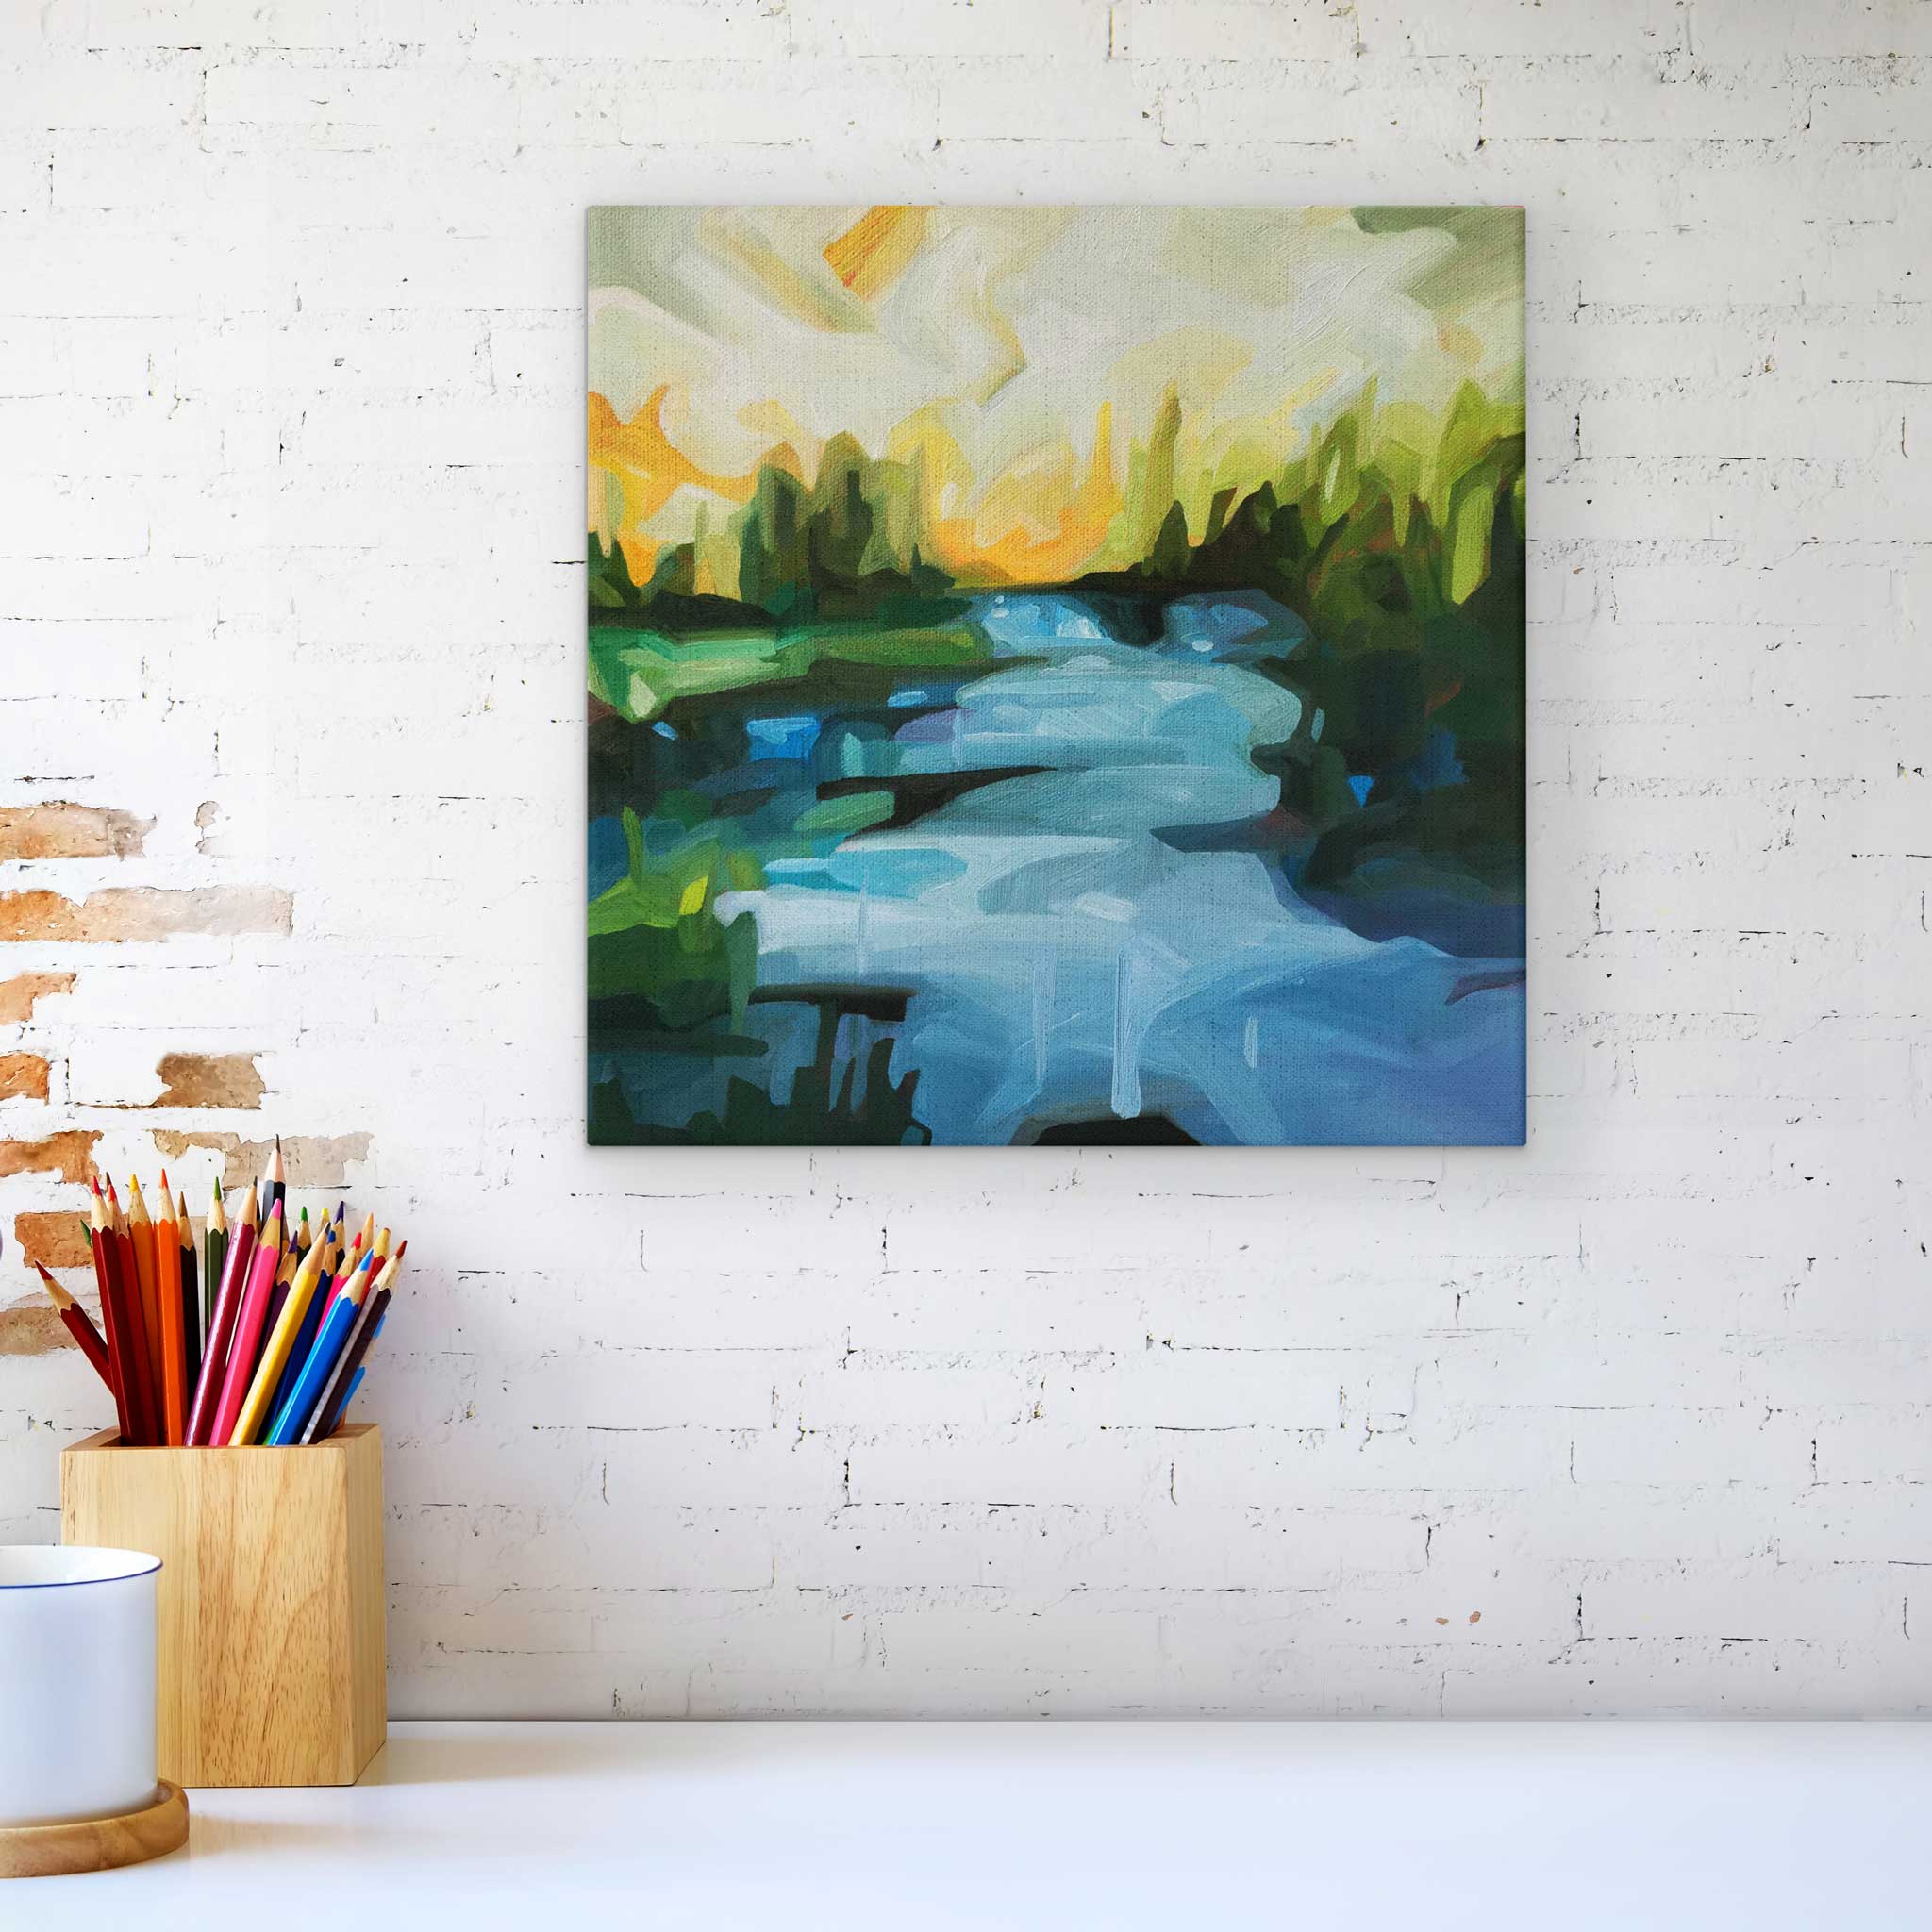 Lakelands 12-1 original abstract landscape paintings by Canadian abstract artist Susannah Bleasby